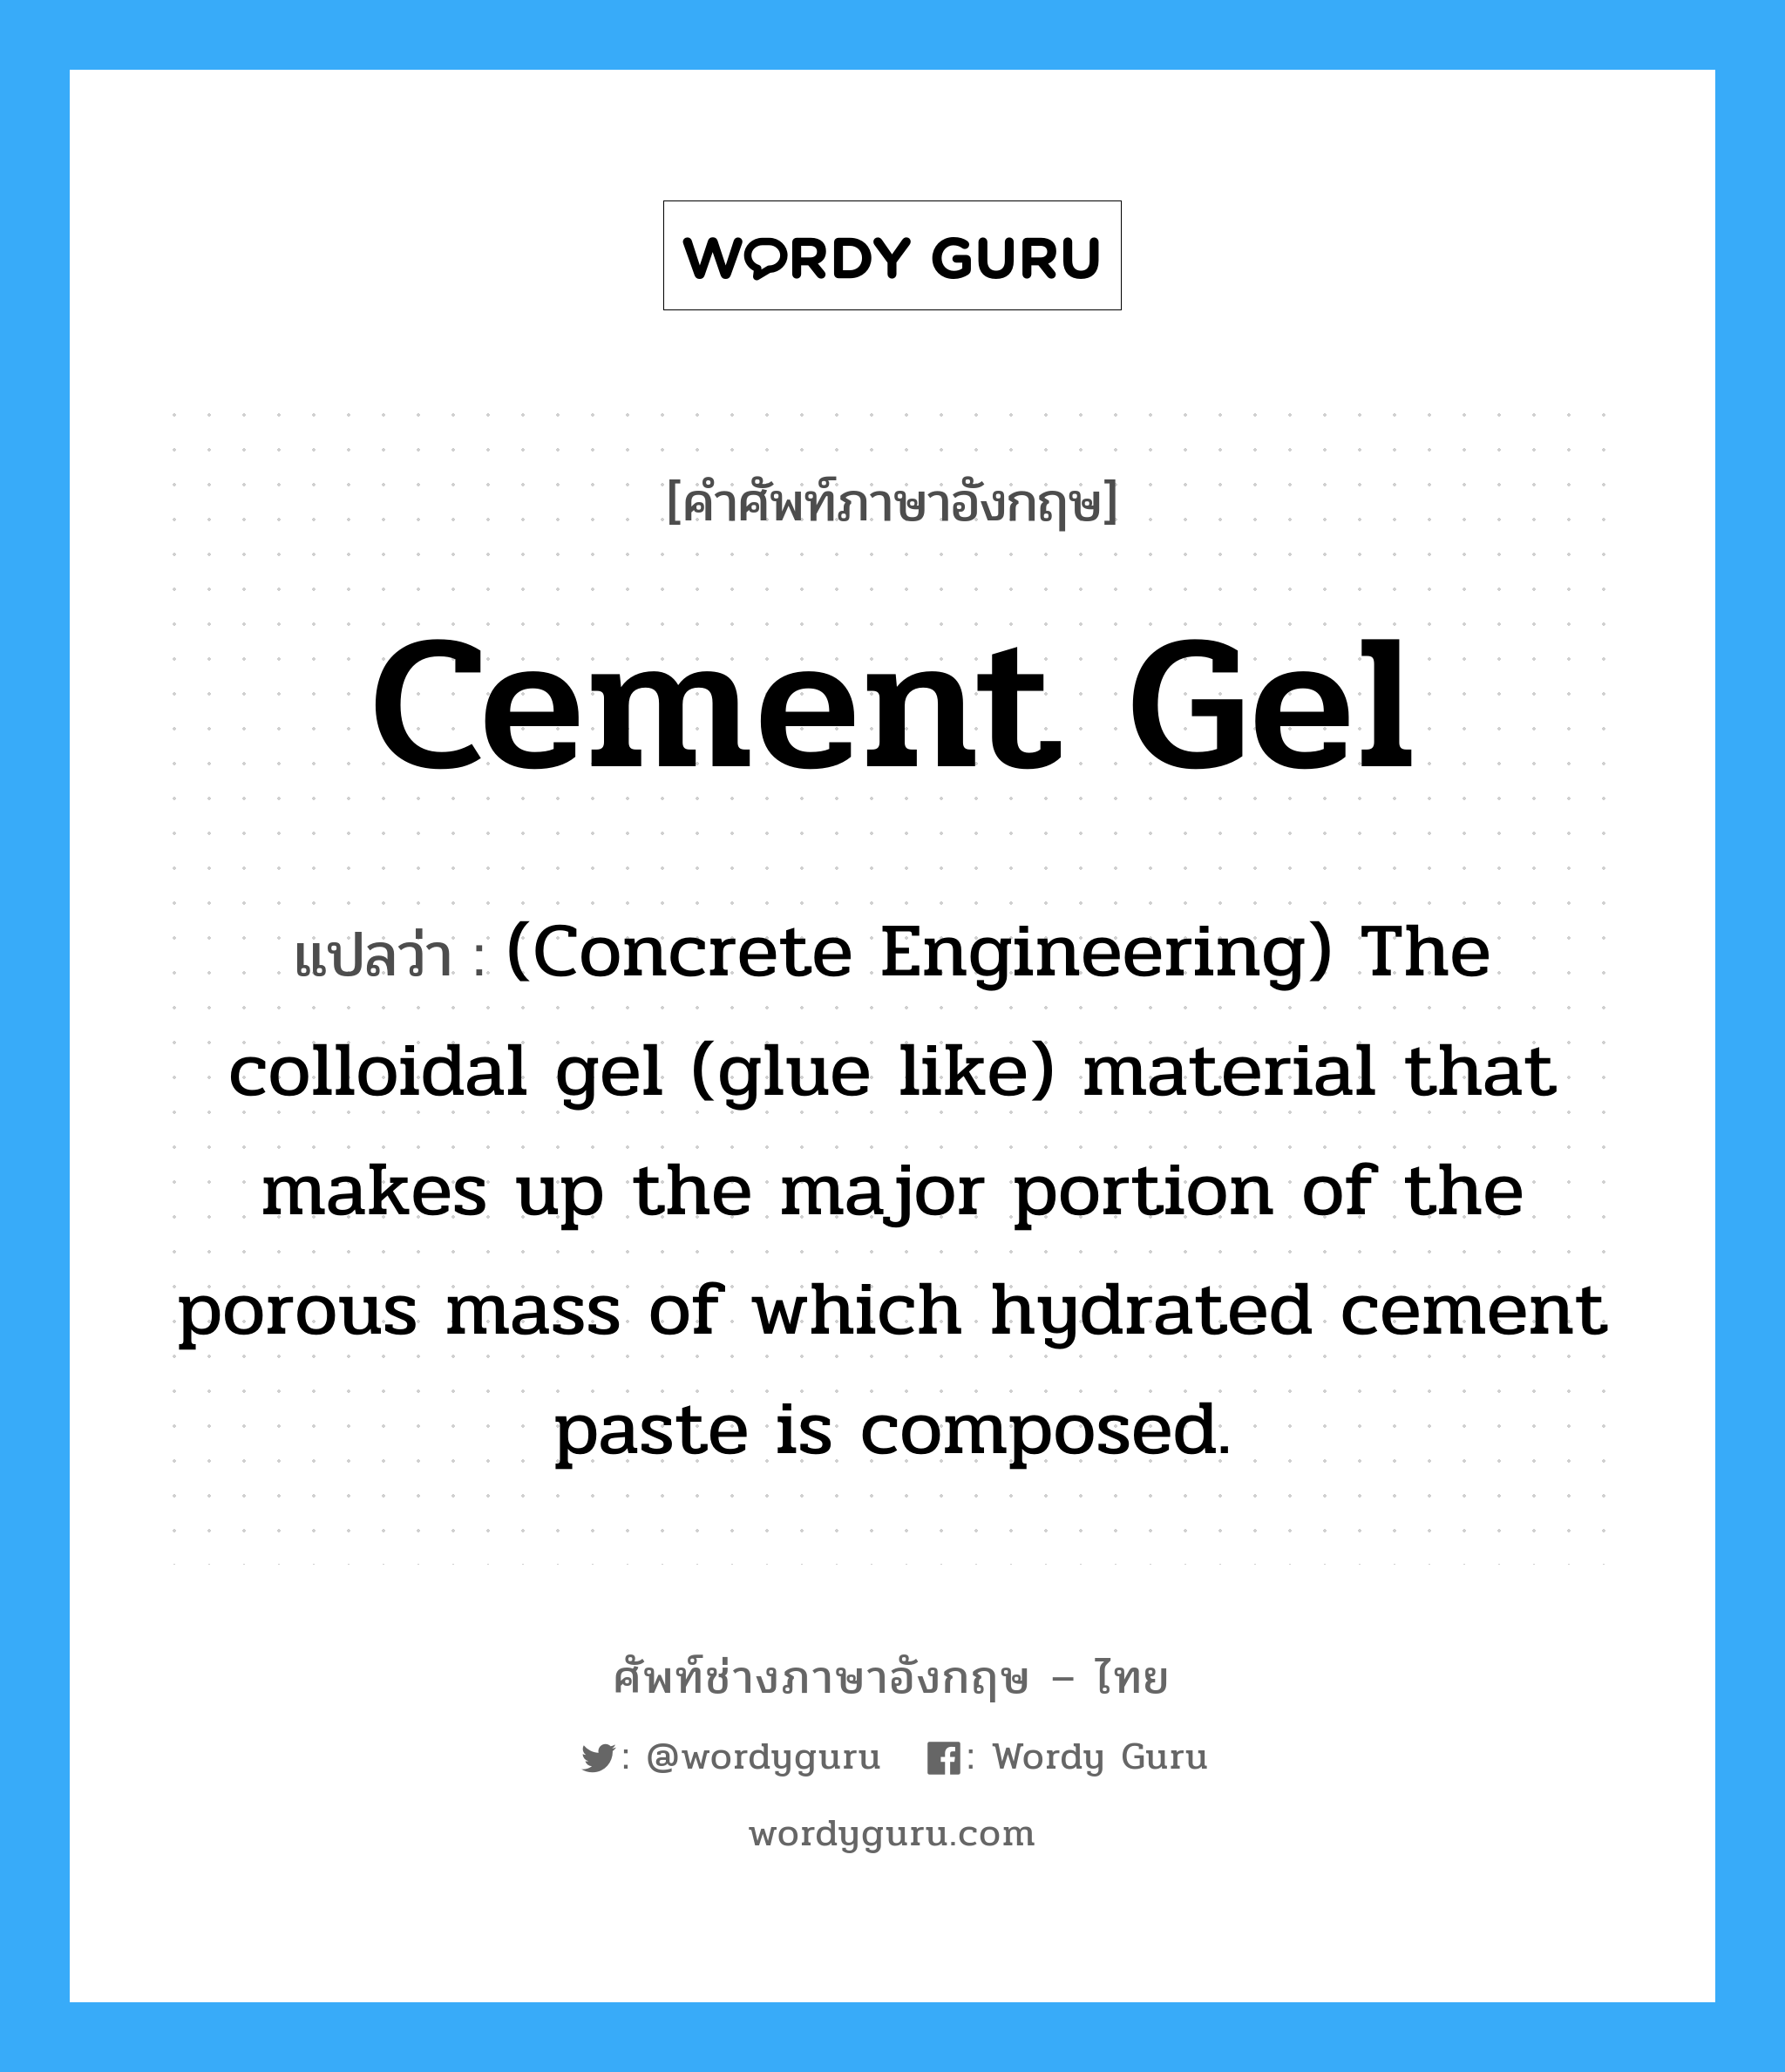 (Concrete Engineering) The colloidal gel (glue like) material that makes up the major portion of the porous mass of which hydrated cement paste is composed. ภาษาอังกฤษ?, คำศัพท์ช่างภาษาอังกฤษ - ไทย (Concrete Engineering) The colloidal gel (glue like) material that makes up the major portion of the porous mass of which hydrated cement paste is composed. คำศัพท์ภาษาอังกฤษ (Concrete Engineering) The colloidal gel (glue like) material that makes up the major portion of the porous mass of which hydrated cement paste is composed. แปลว่า Cement Gel